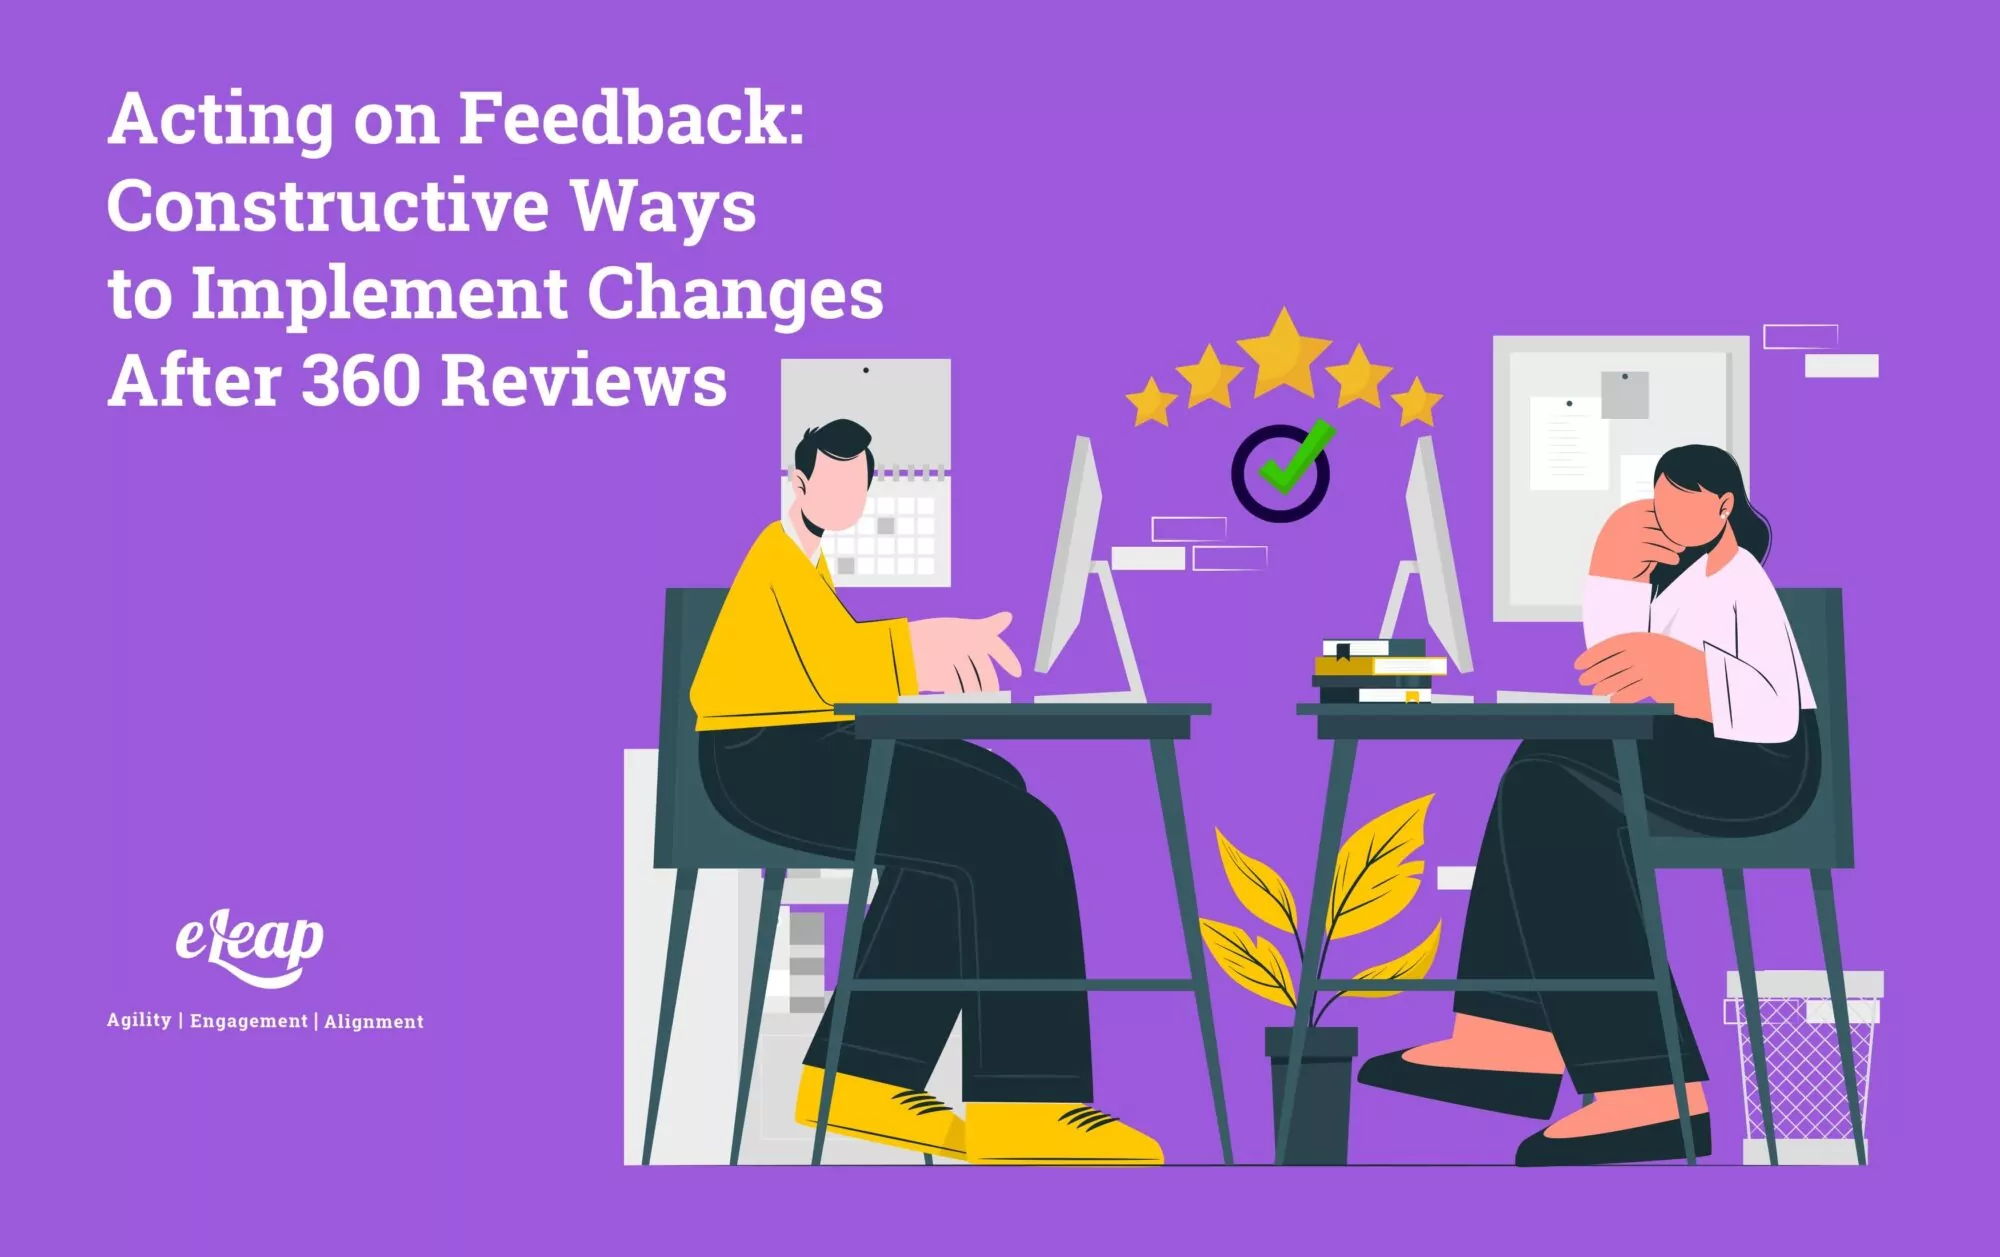 Acting on Feedback: Constructive Ways to Implement Changes After 360 Reviews